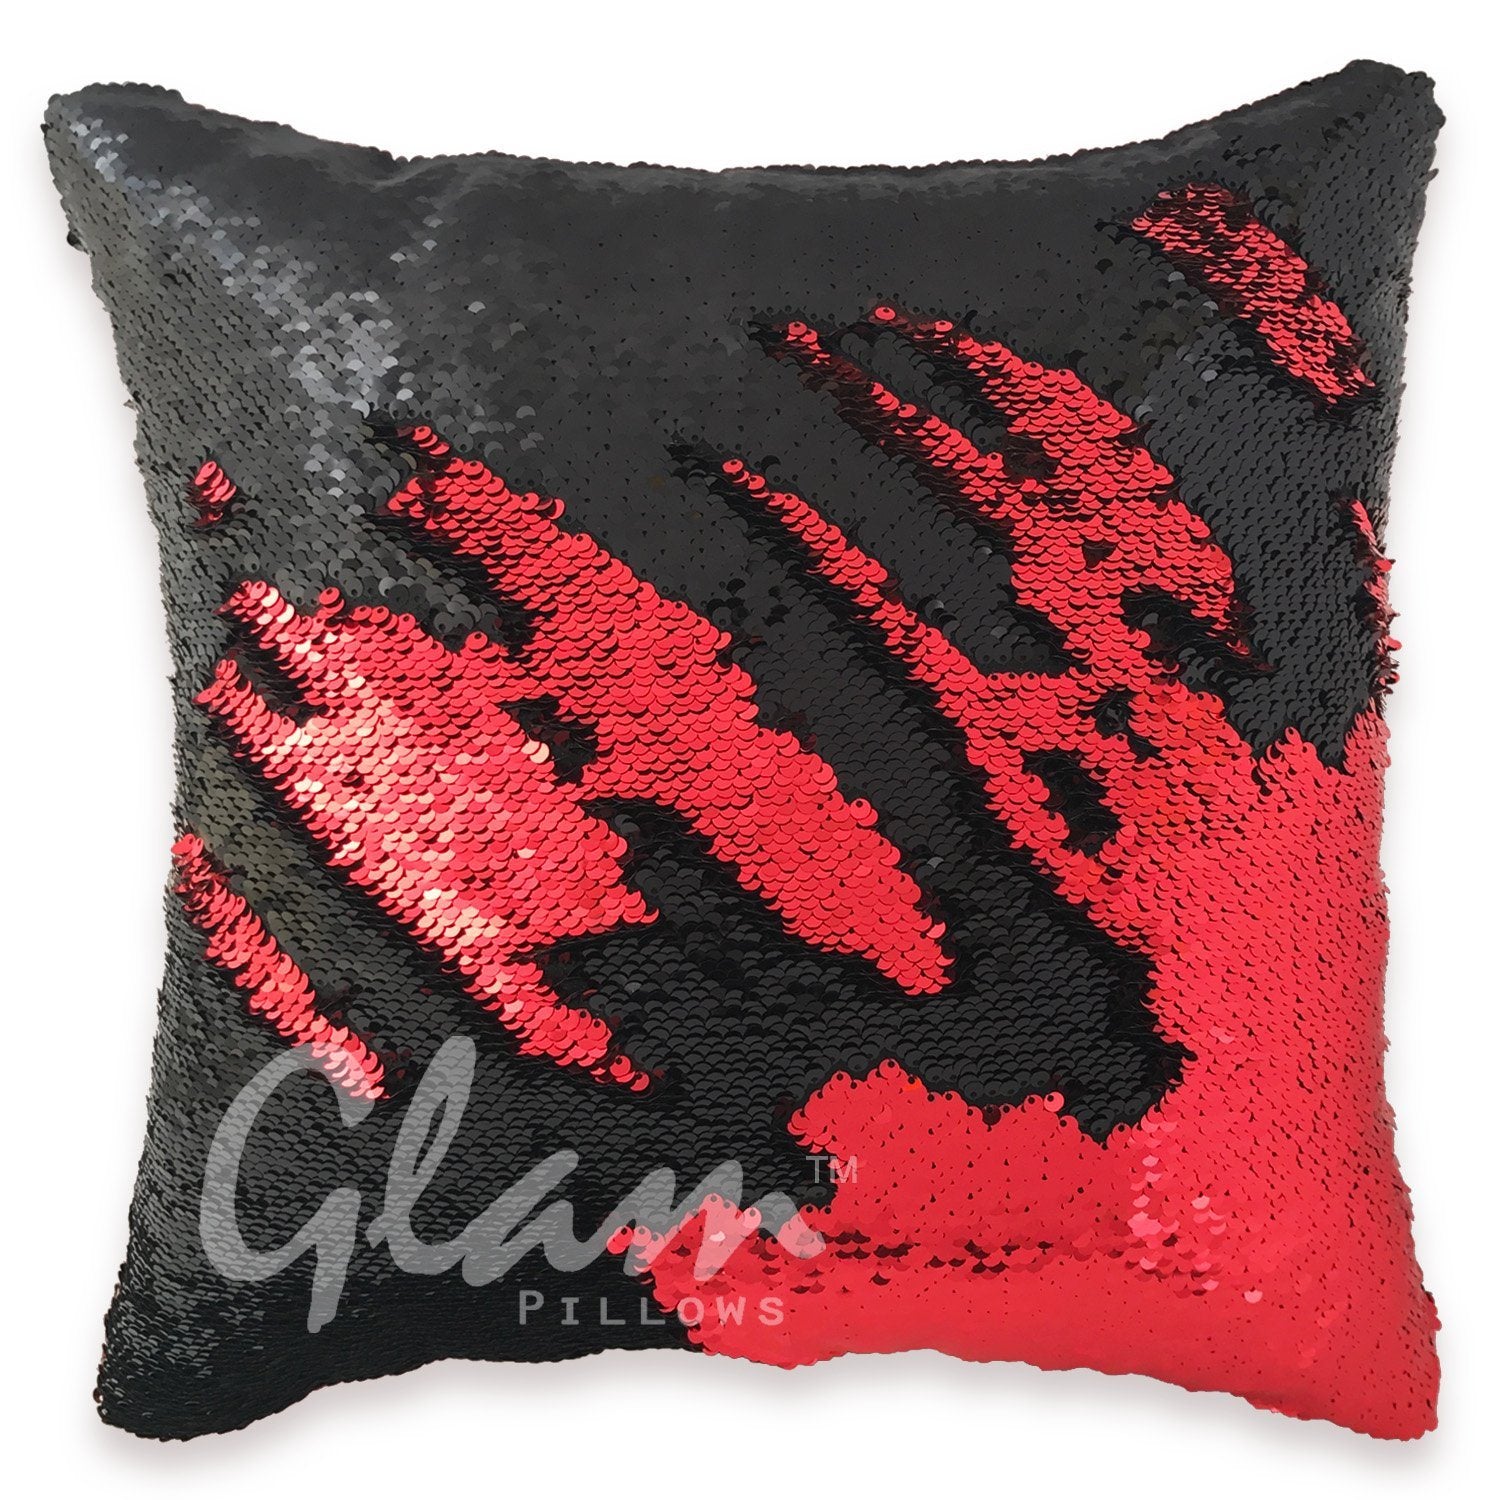 Red & Black Reversible Sequin Glam Pillow - Glam Pillows